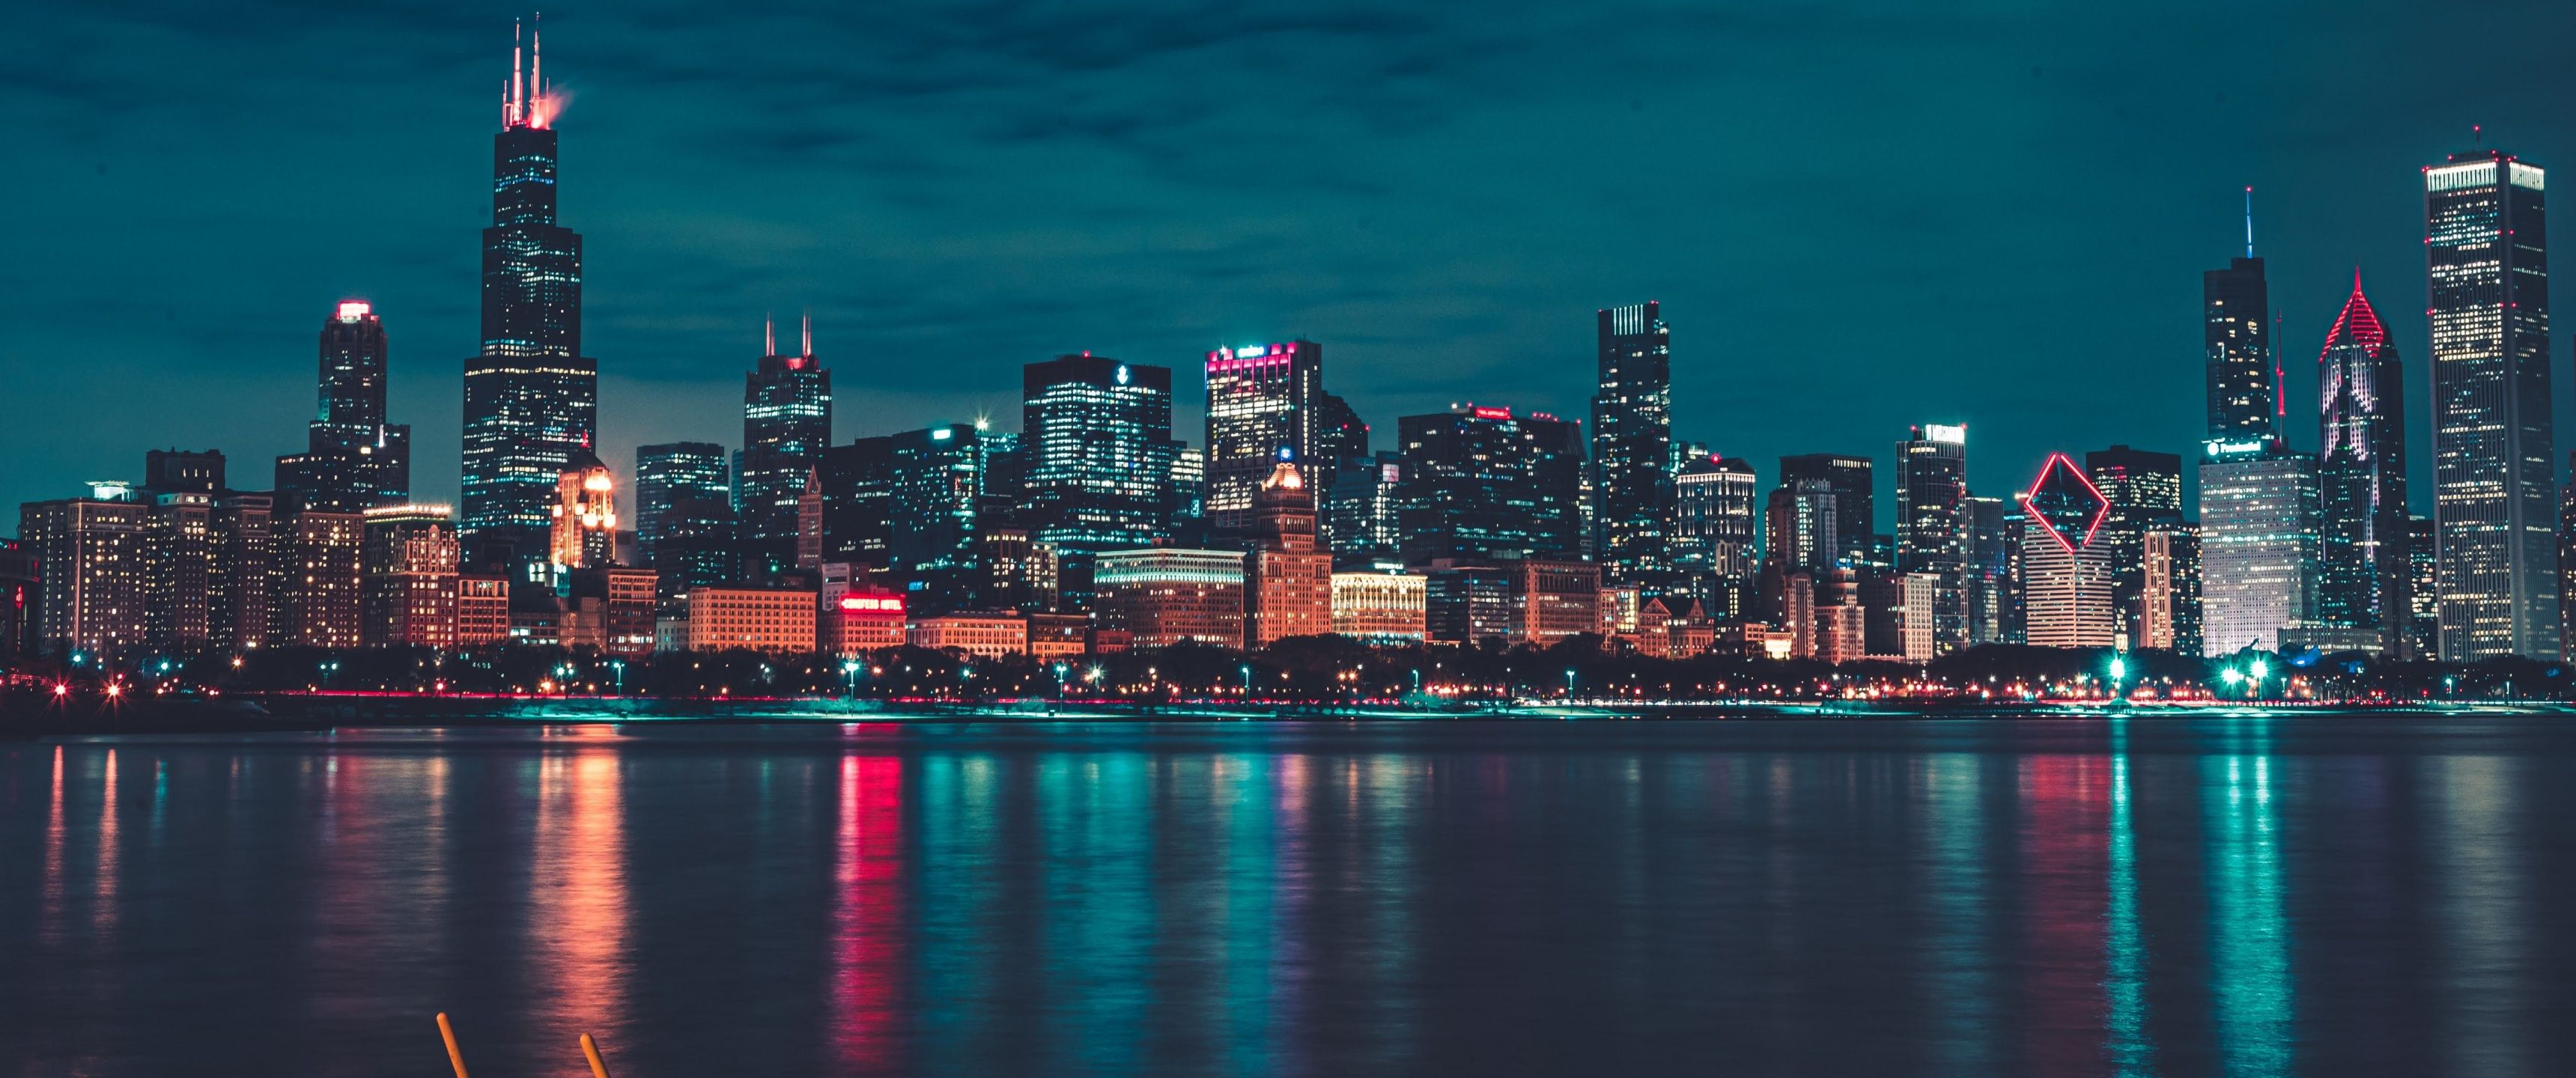 A city skyline at night with lights reflecting in the water - Chicago